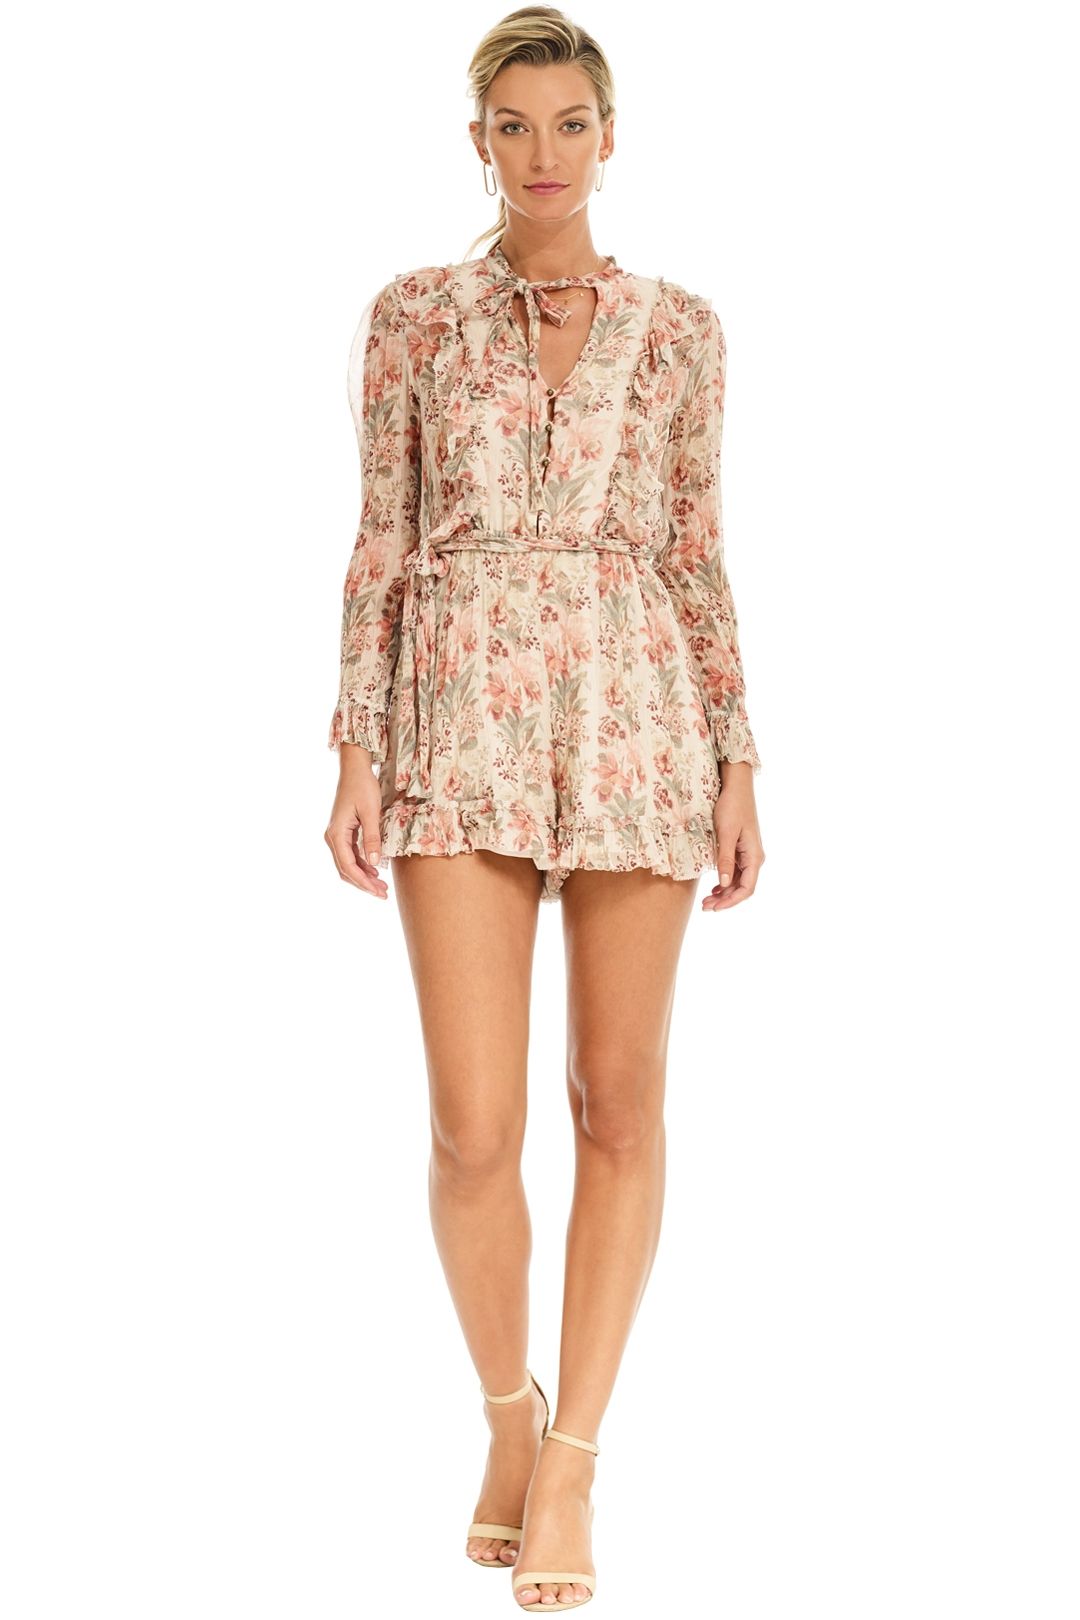 Zimmermann - Folly Neck Tie Playsuit - Cream Floral - Front